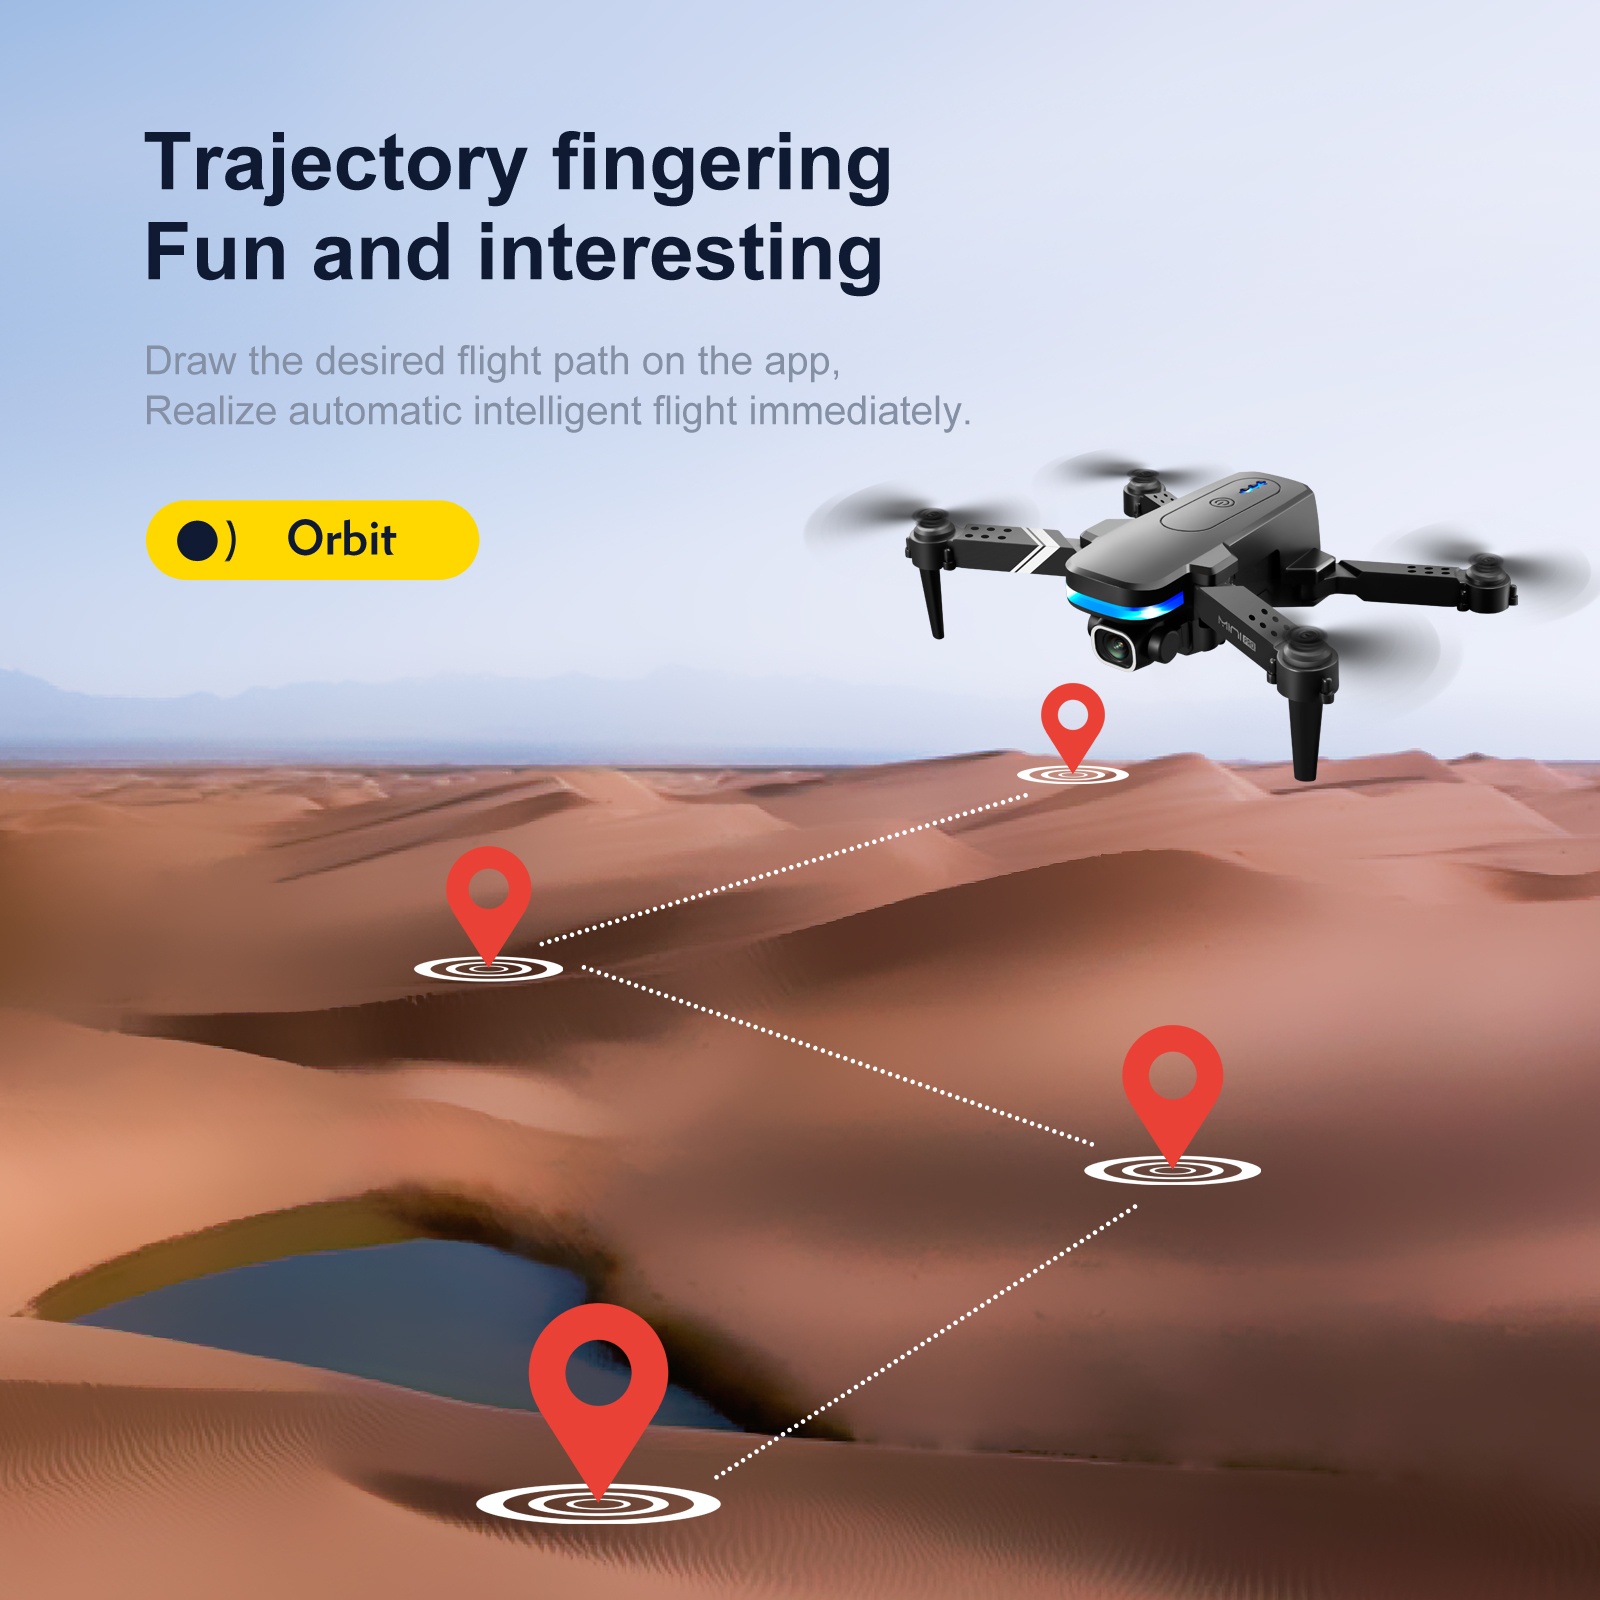 KY910-Mini-WiFi-FPV-with-4K-HD-Dual-50x-ZOOM-Camera-Altitude-Hold-Mode-Gravity-Control-Foldable-RC-D-1902386-20